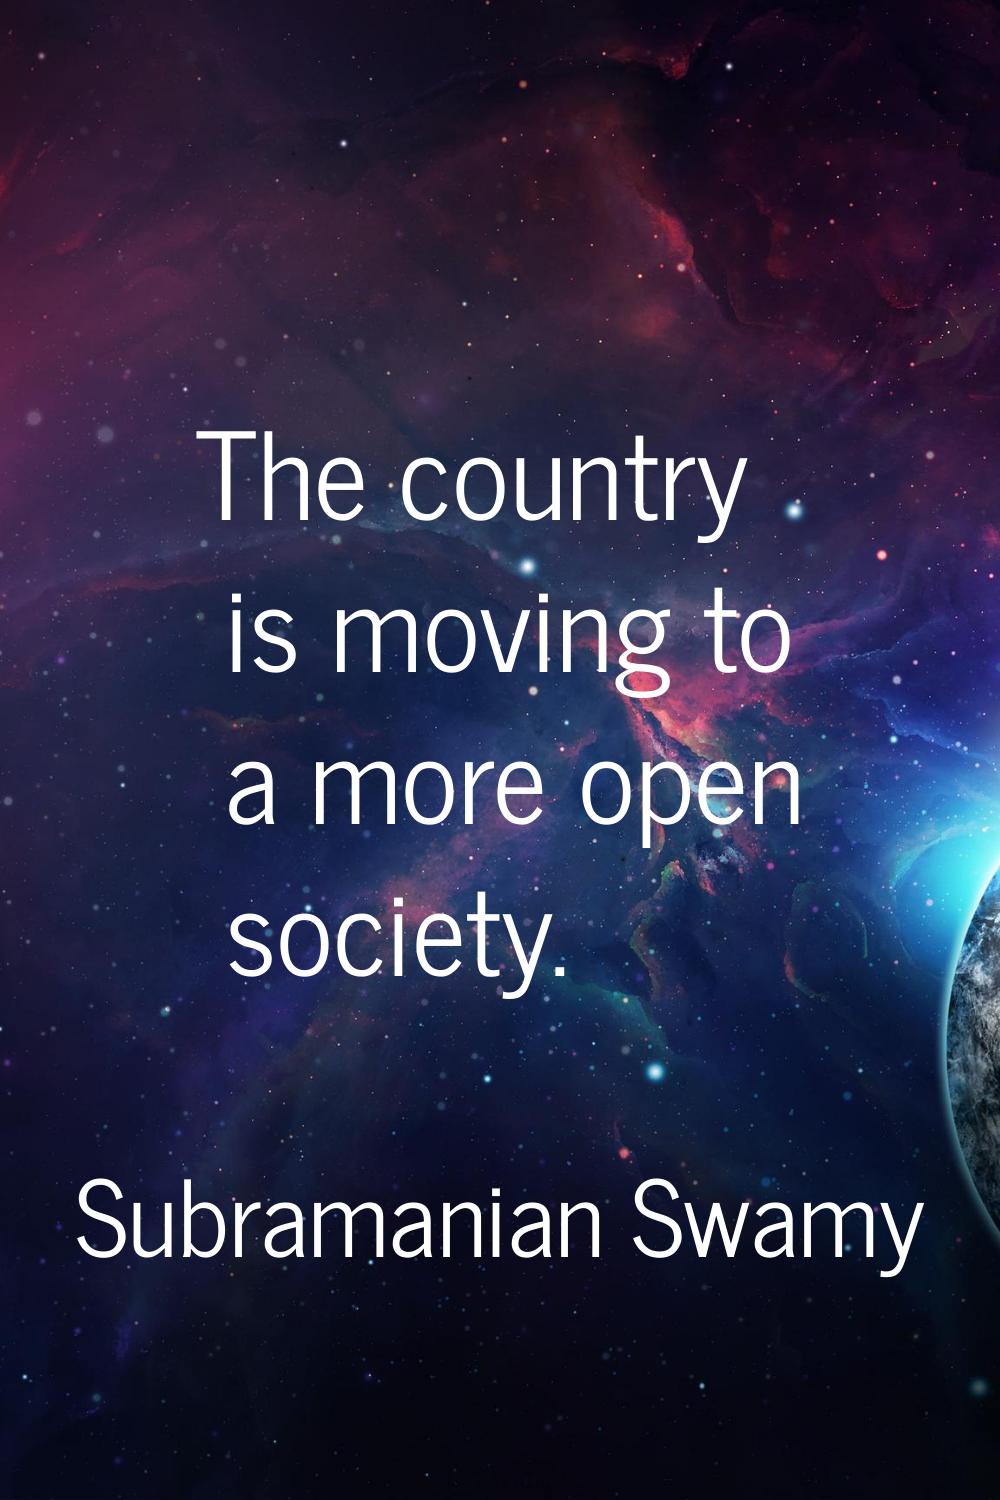 The country is moving to a more open society.